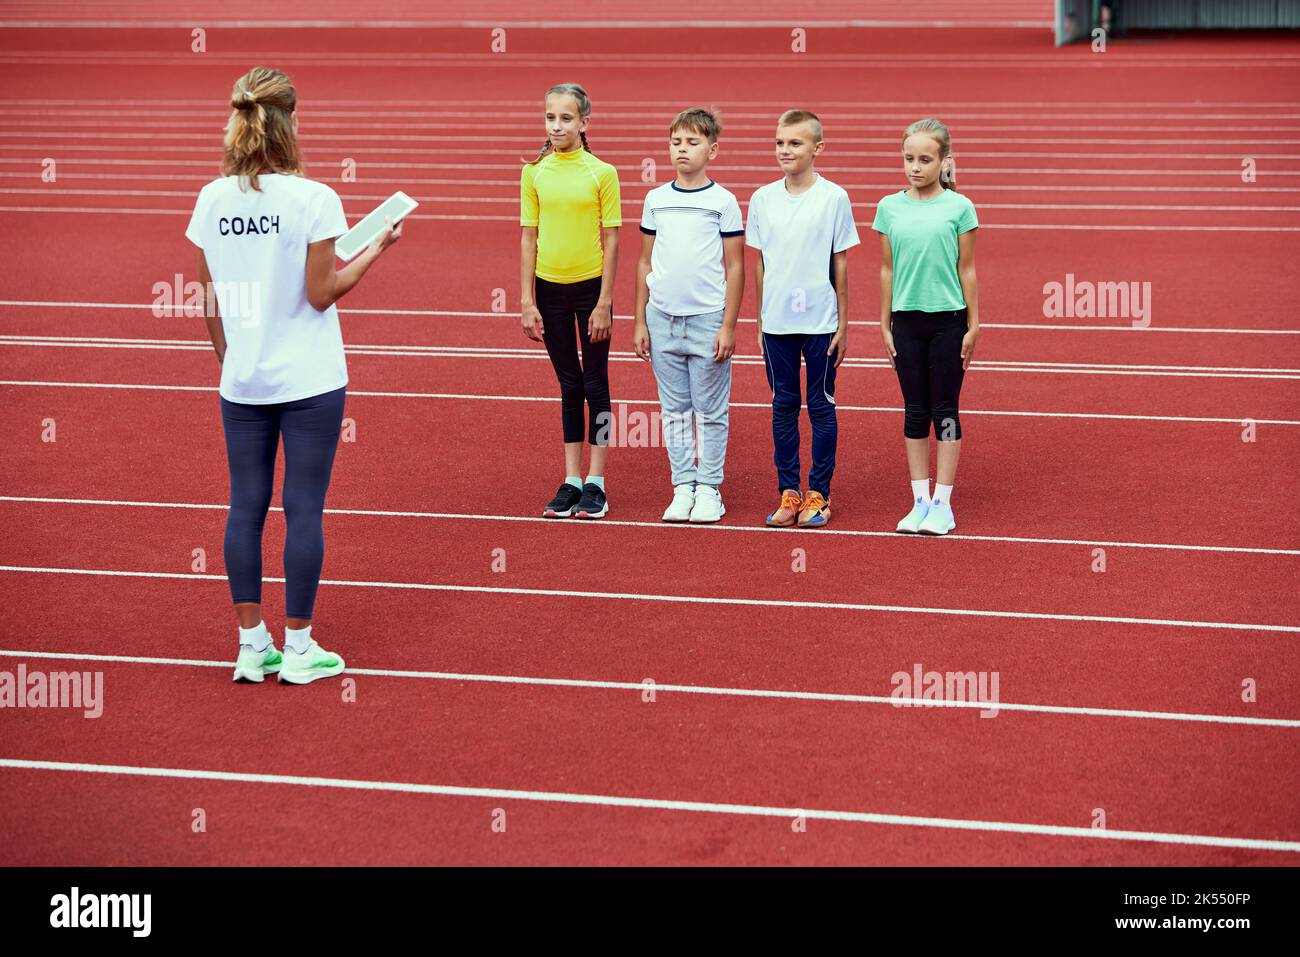 Female coach training beginner athletes. Group of children before running on treadmill at the stadium. Concept of sport, achievements, studying, goals Stock Photo